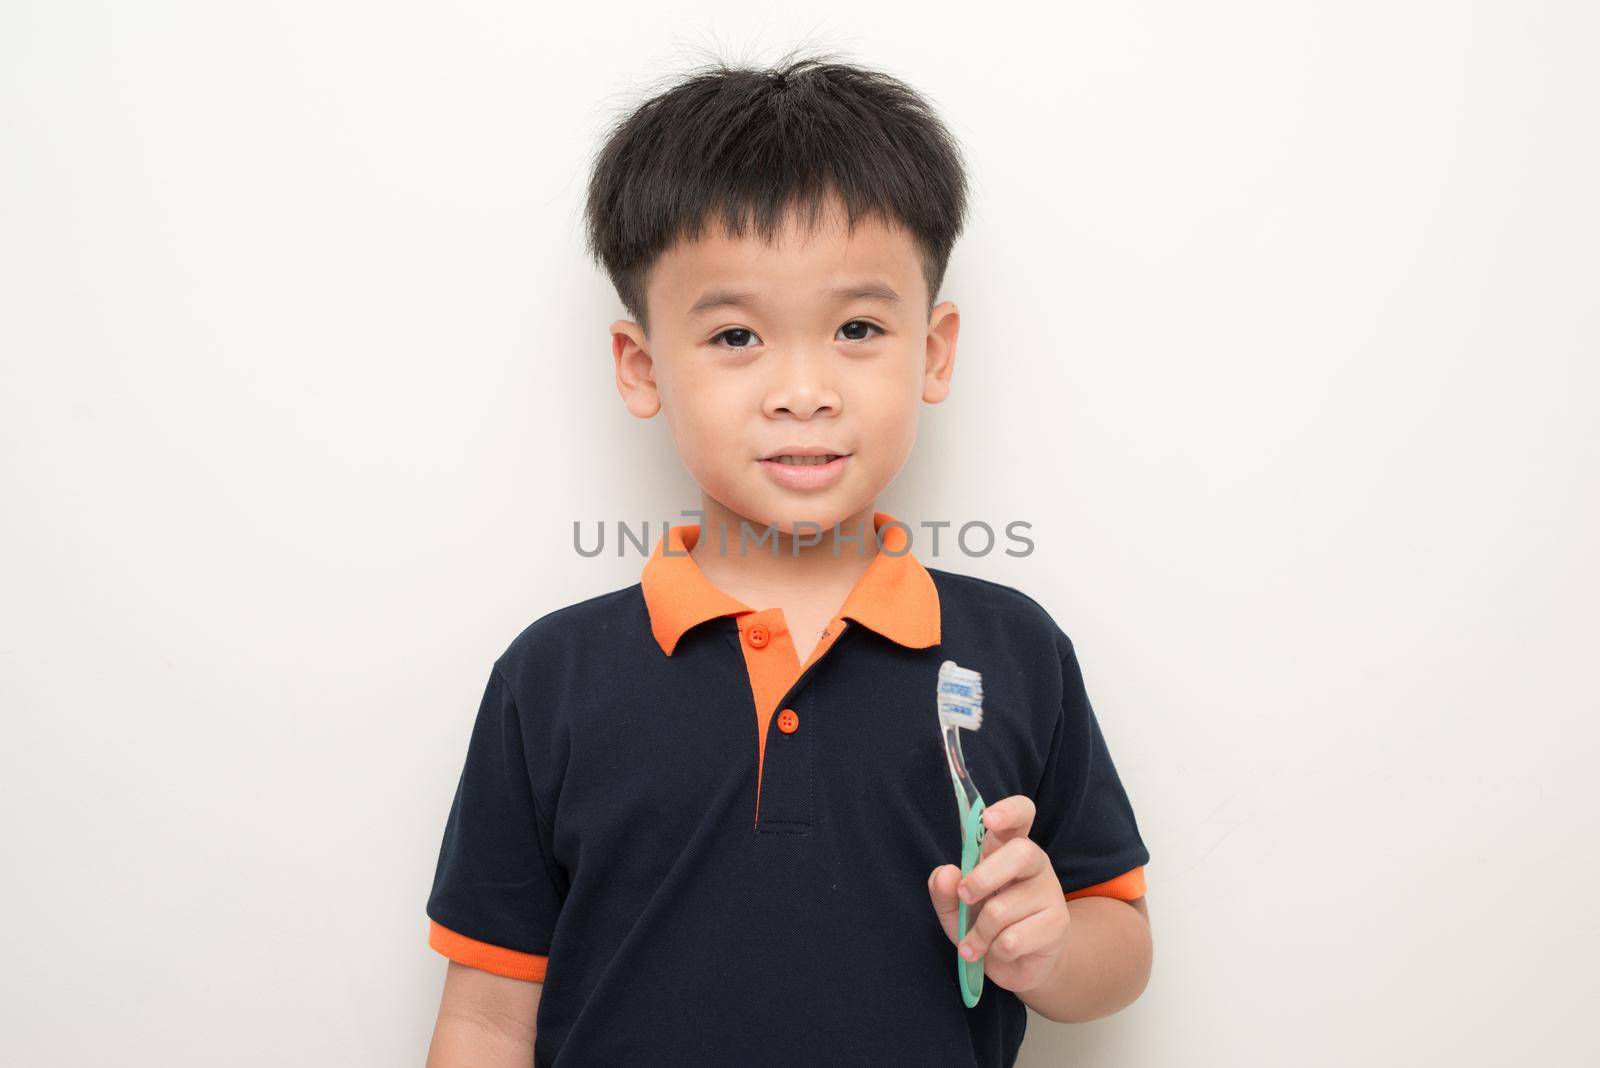 Cheerful little boy holding a tooth brush over white background, Studio portrait of a healthy mixed race boy with a toothbrush isolated.